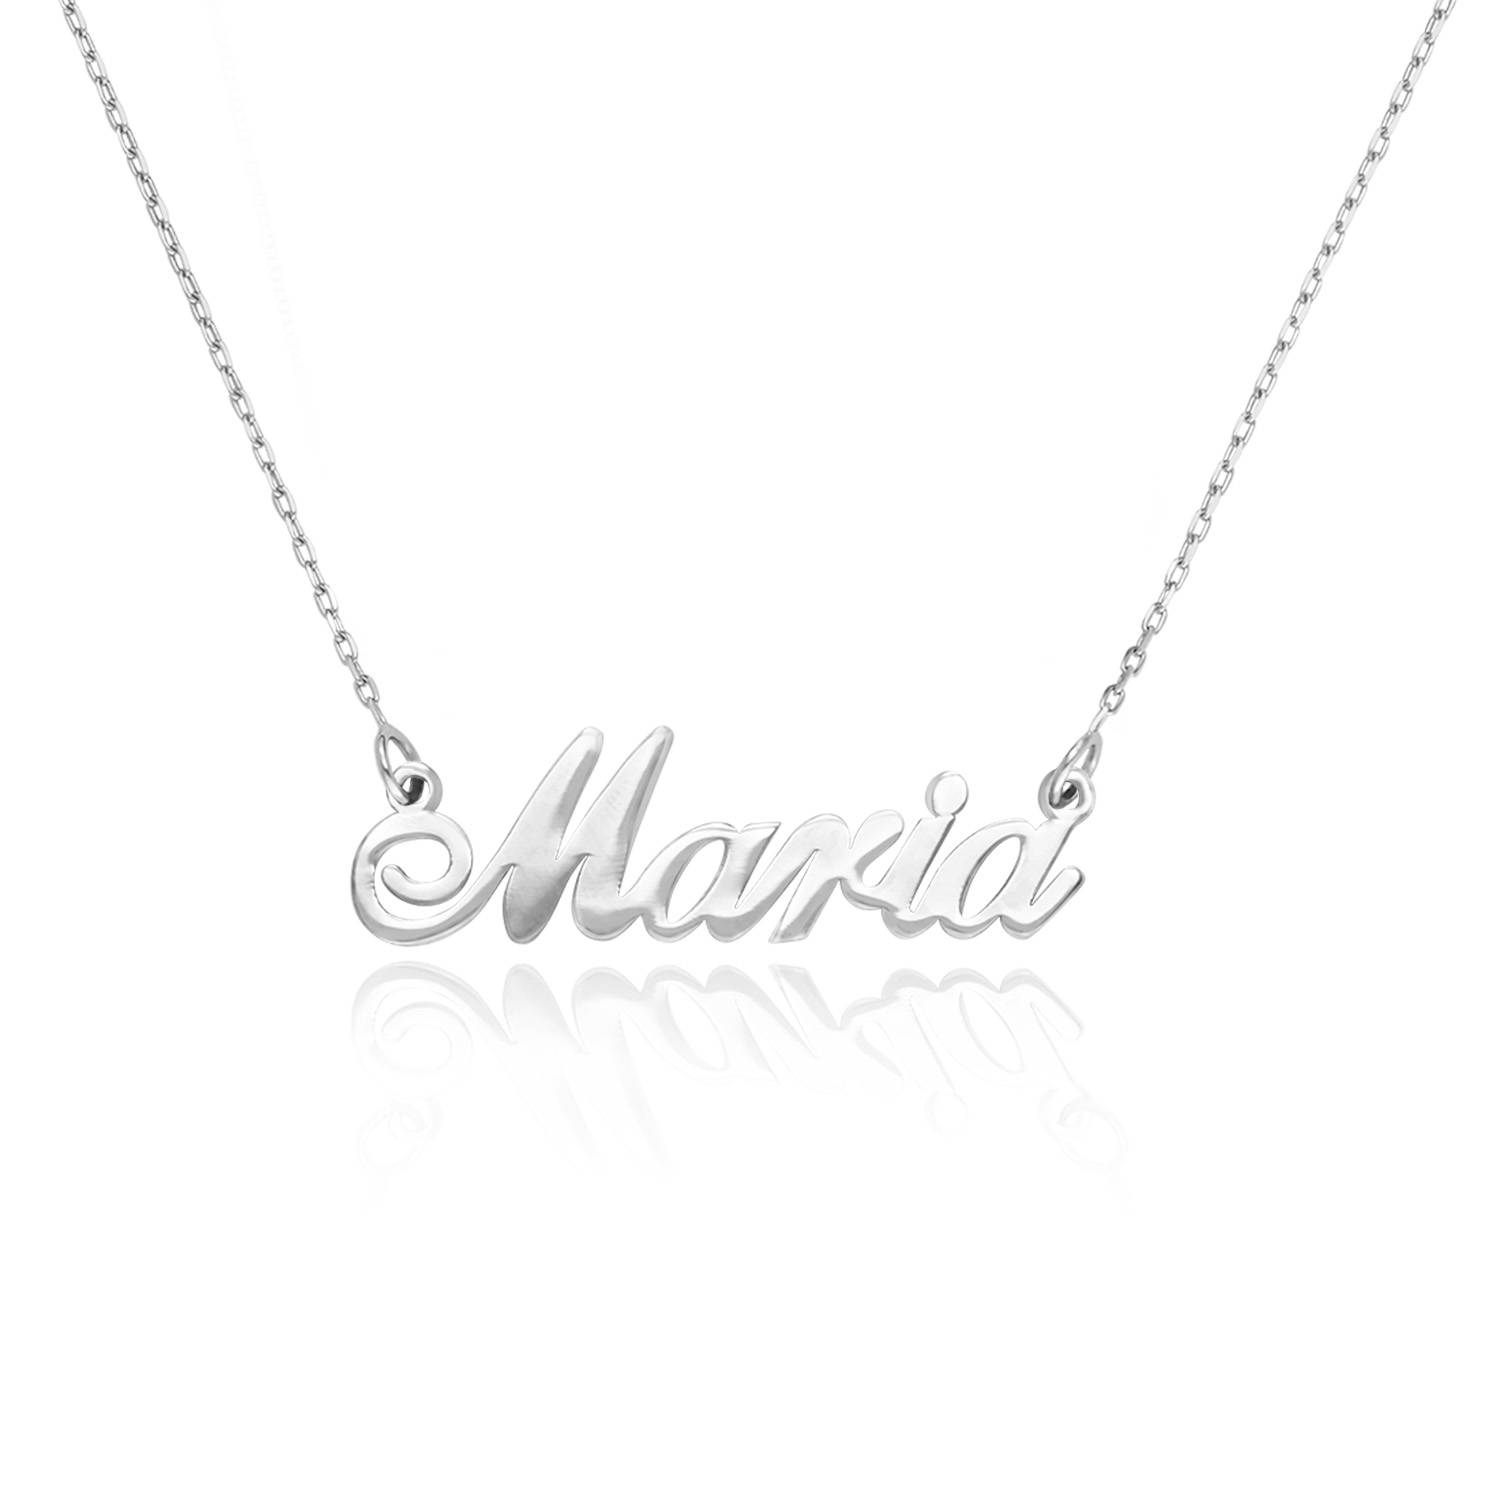 14k Wit Goud "Carrie" Stijl Naam Ketting-3 Productfoto